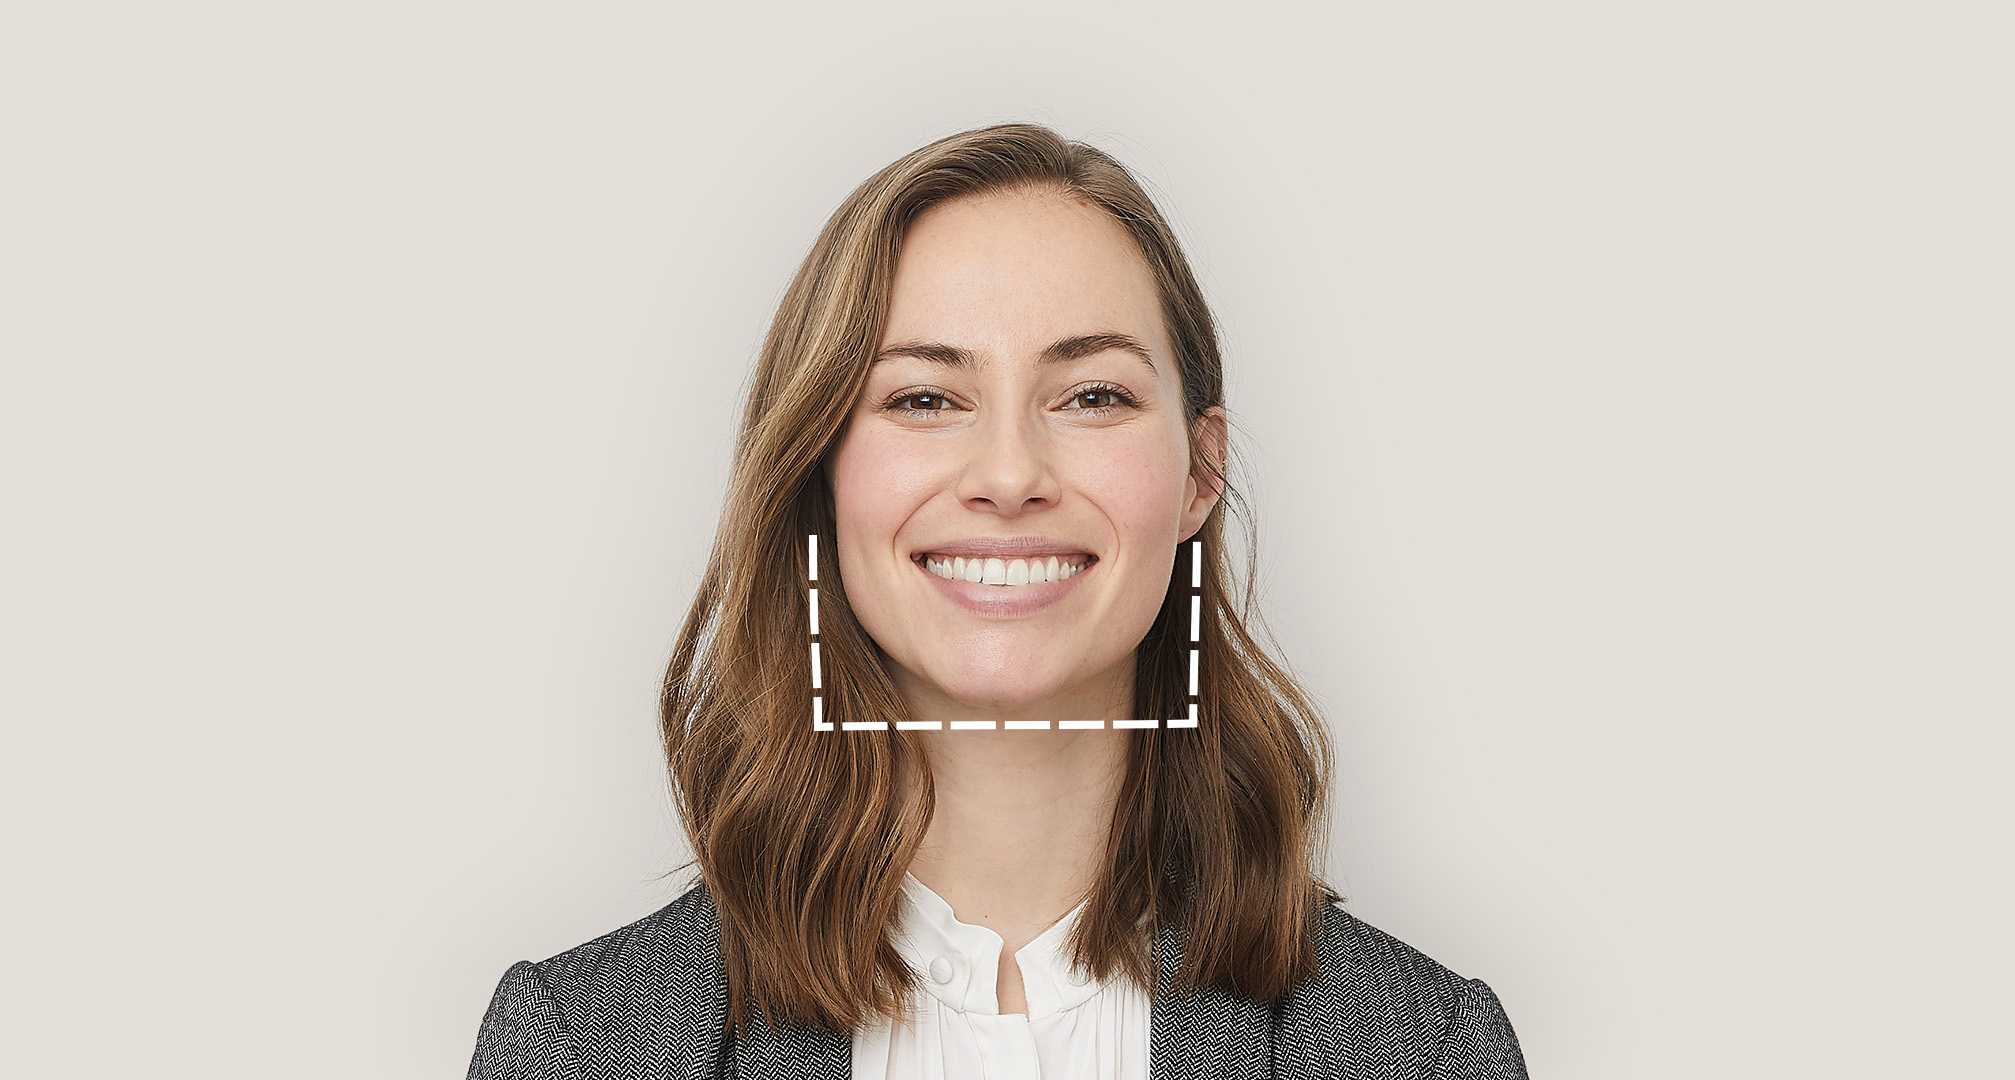 dotted outline of square chin around smiling person